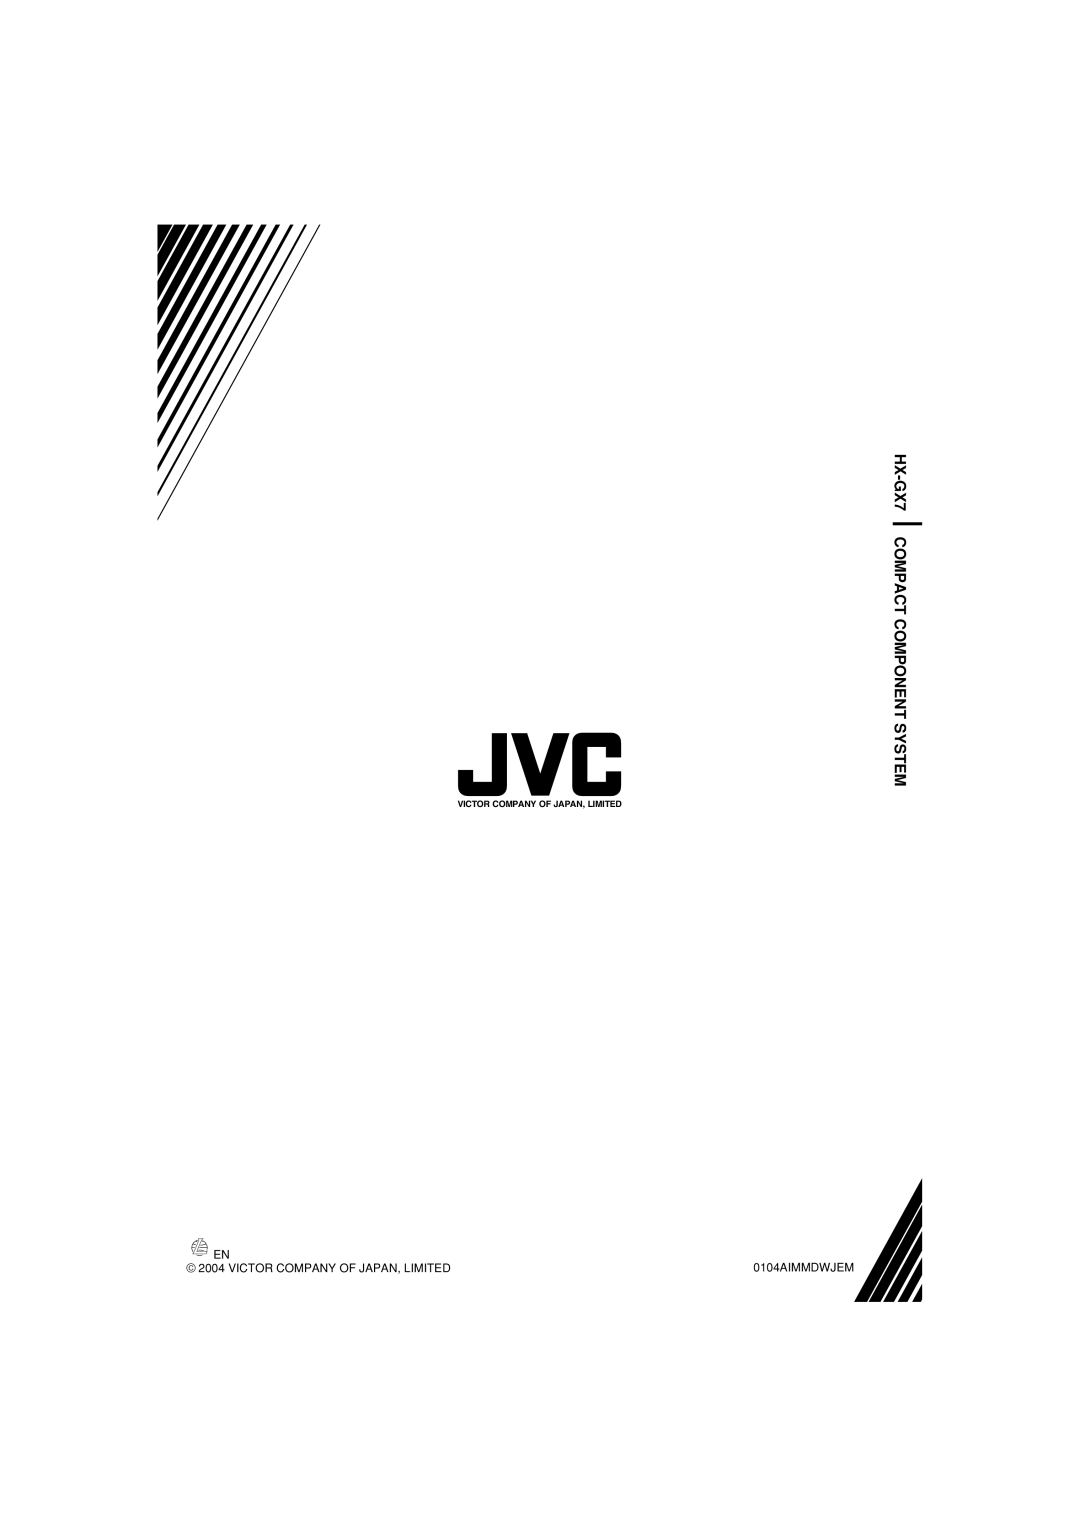 JVC manual HX-GX7COMPACT COMPONENT SYSTEM, 0104AIMMDWJEM, Victor Company Of Japan, Limited 